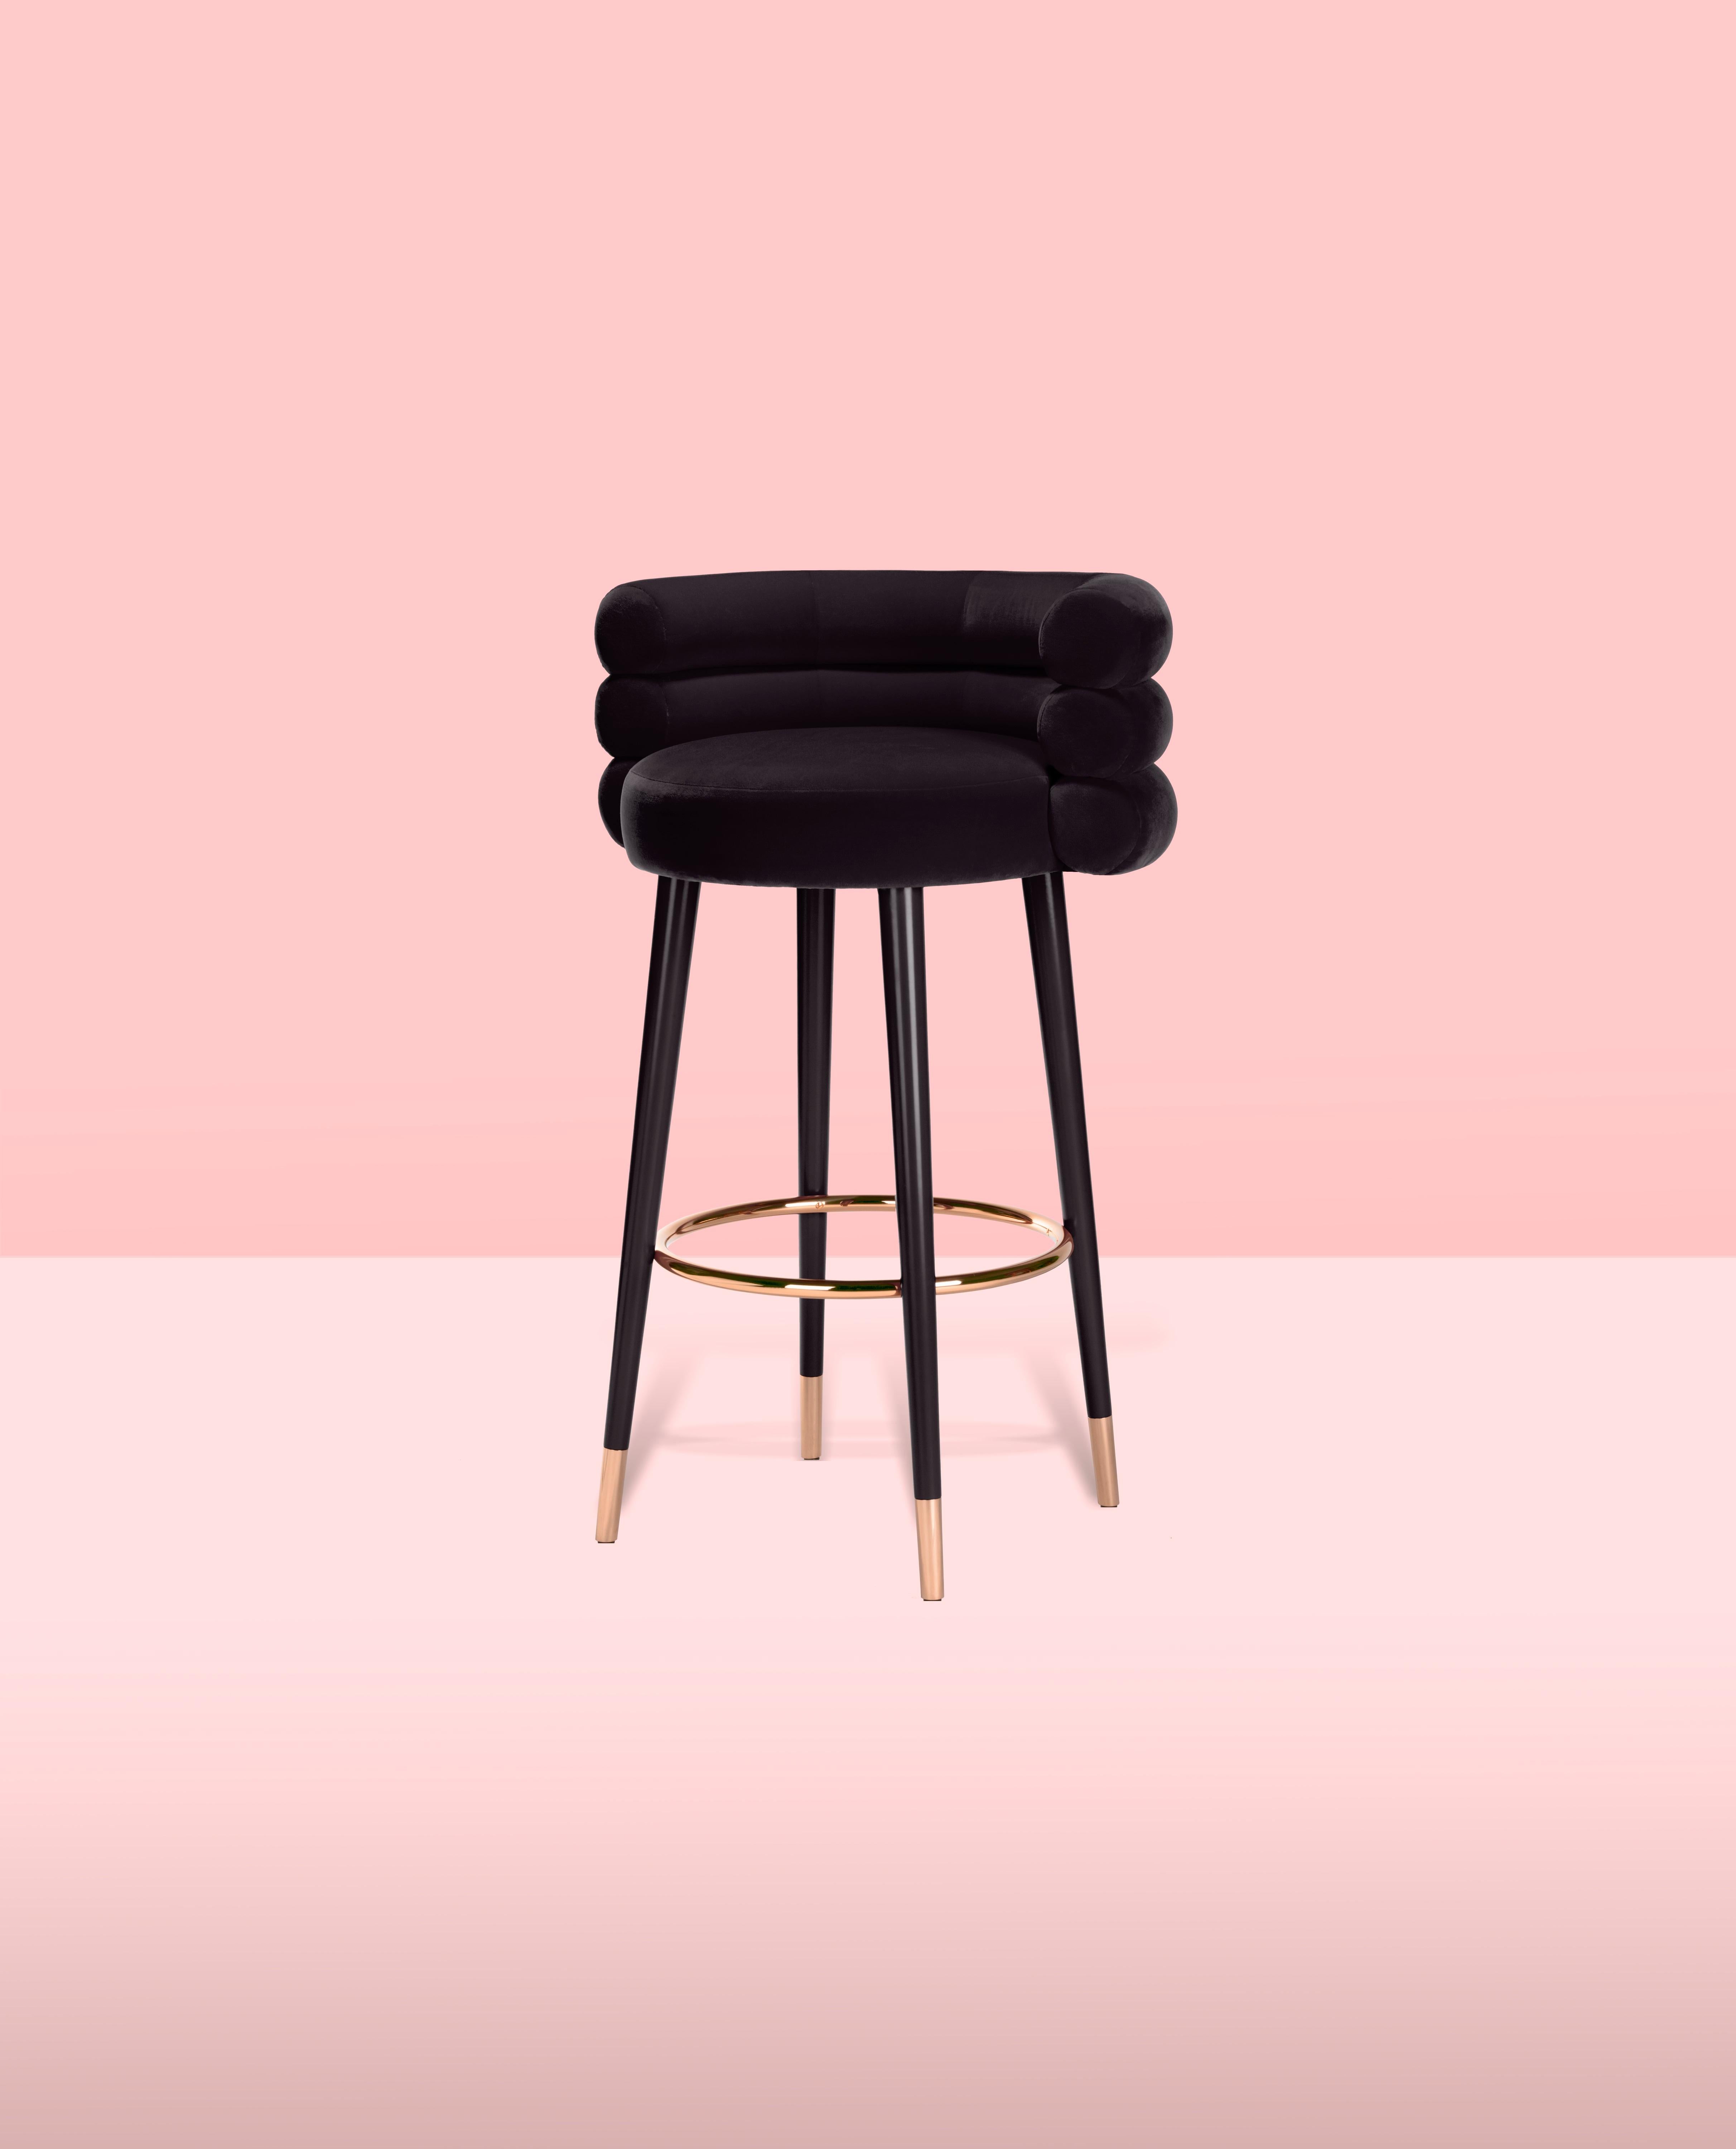 Marshmallow bar stool, Royal stranger
Dimensions: 100 x 70 x 60 cm
Materials: Velvet upholstery, brass
Available in: Mint green, light pink, Royal green, Royal red

Royal stranger is an exclusive furniture brand determined to bring you the best